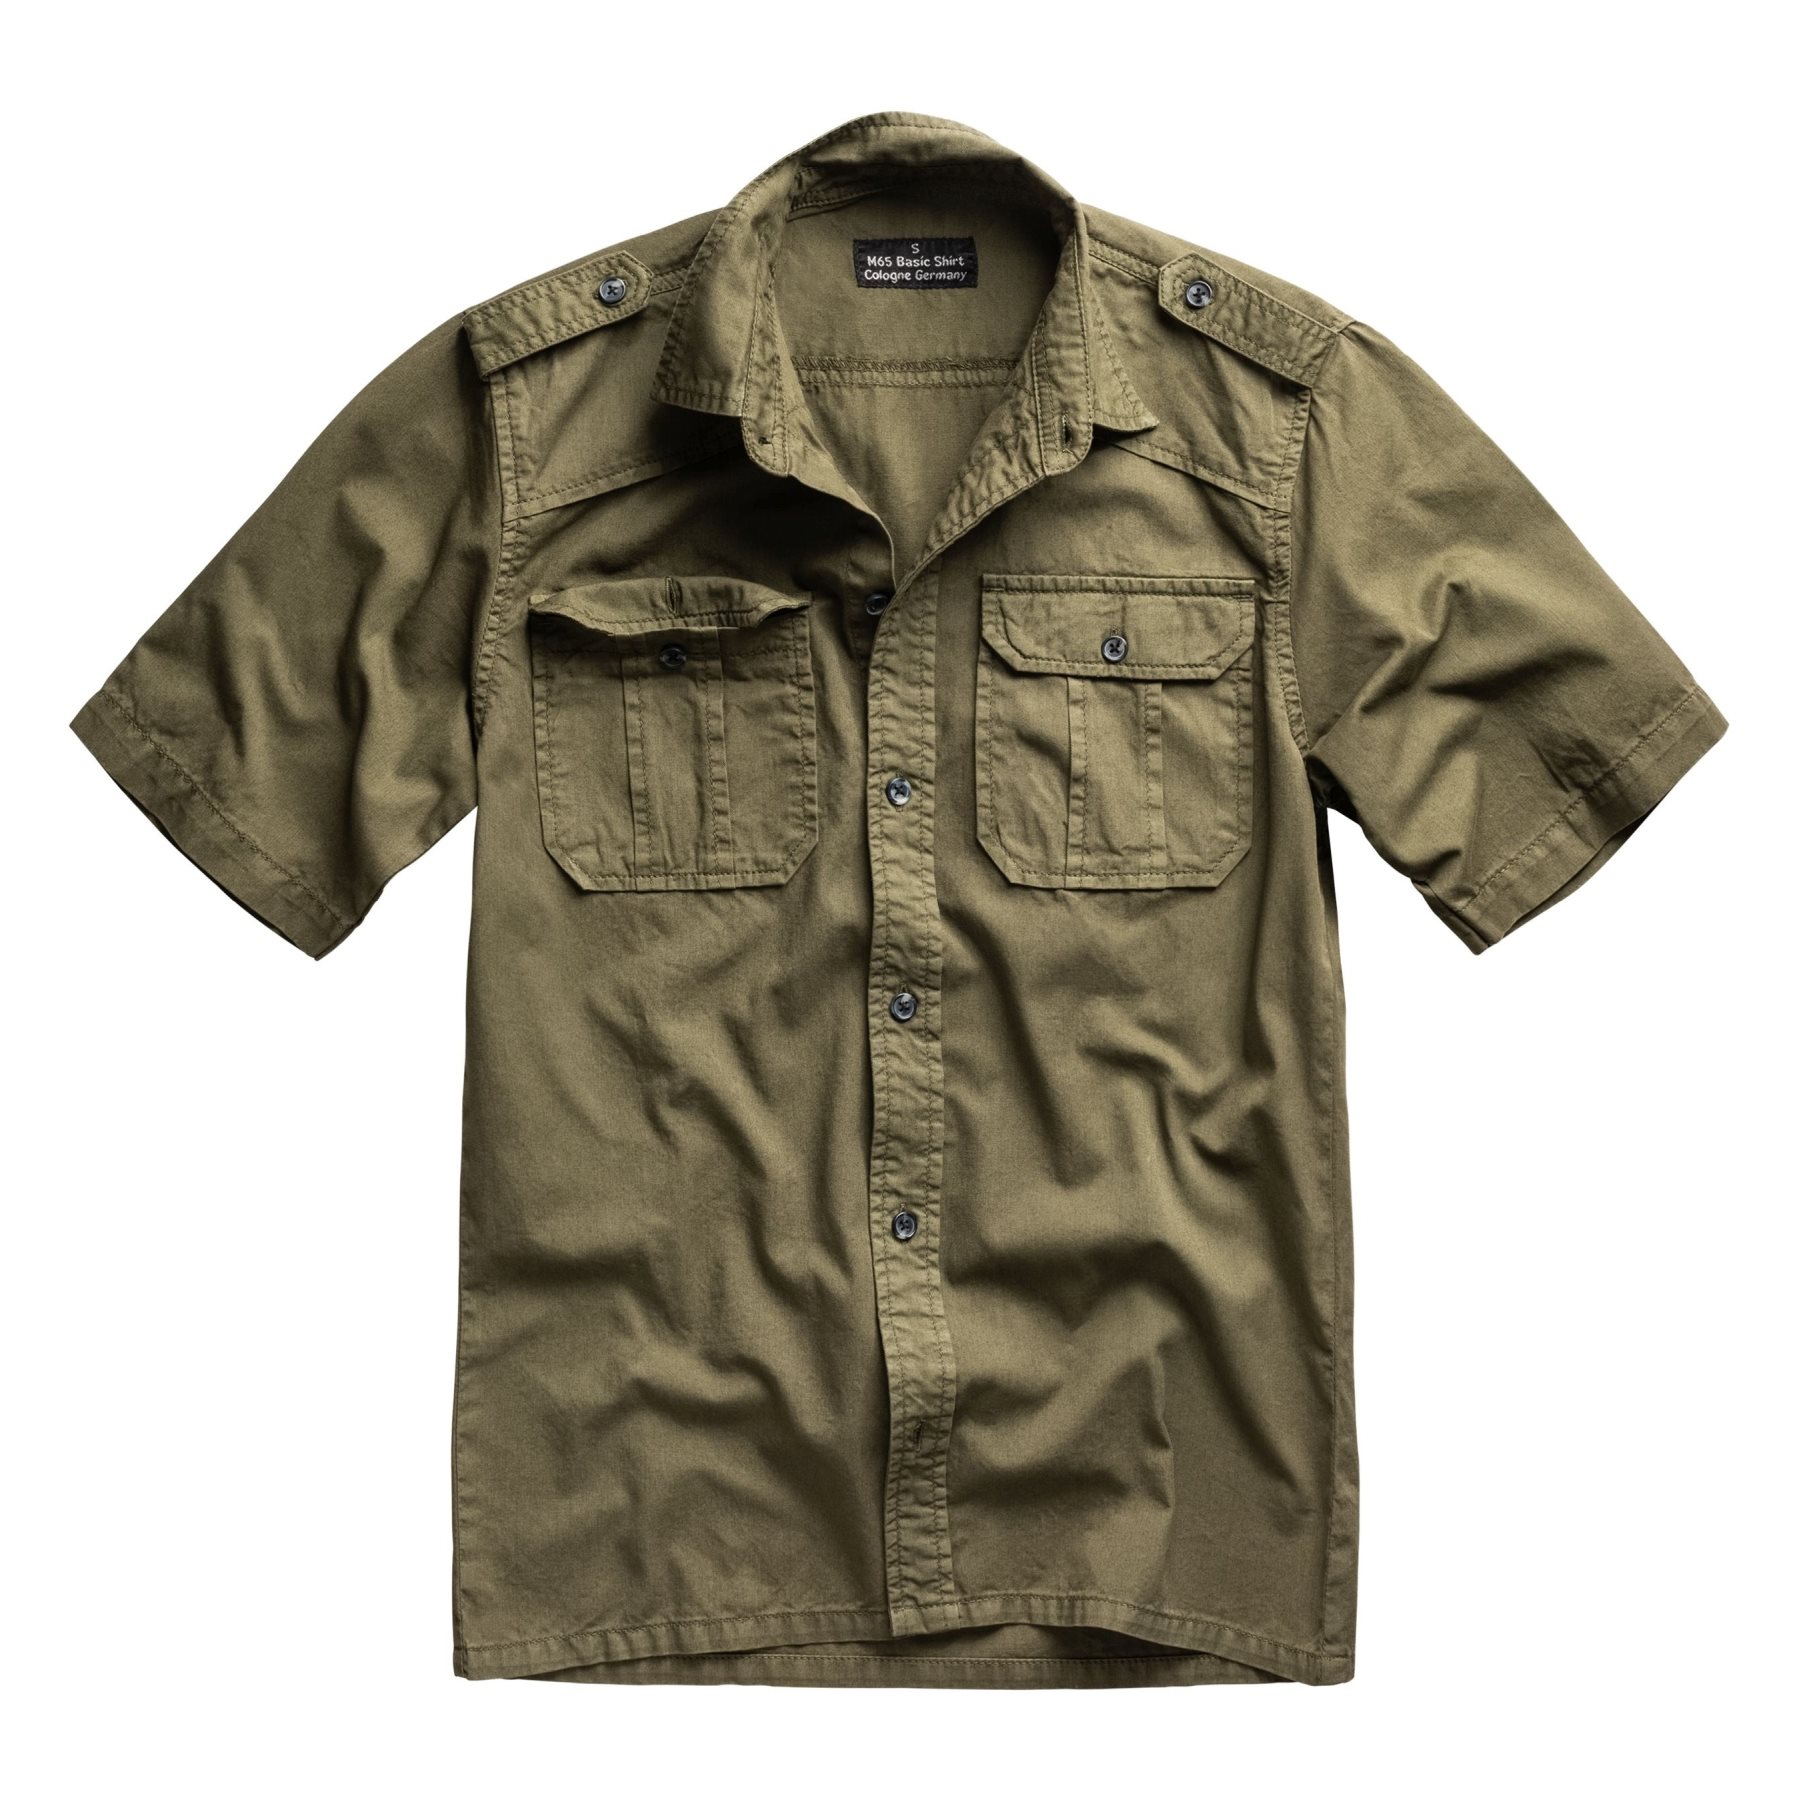 M65 BASIC shirt with short sleeves OLIVE SURPLUS 06-3592-01 L-11